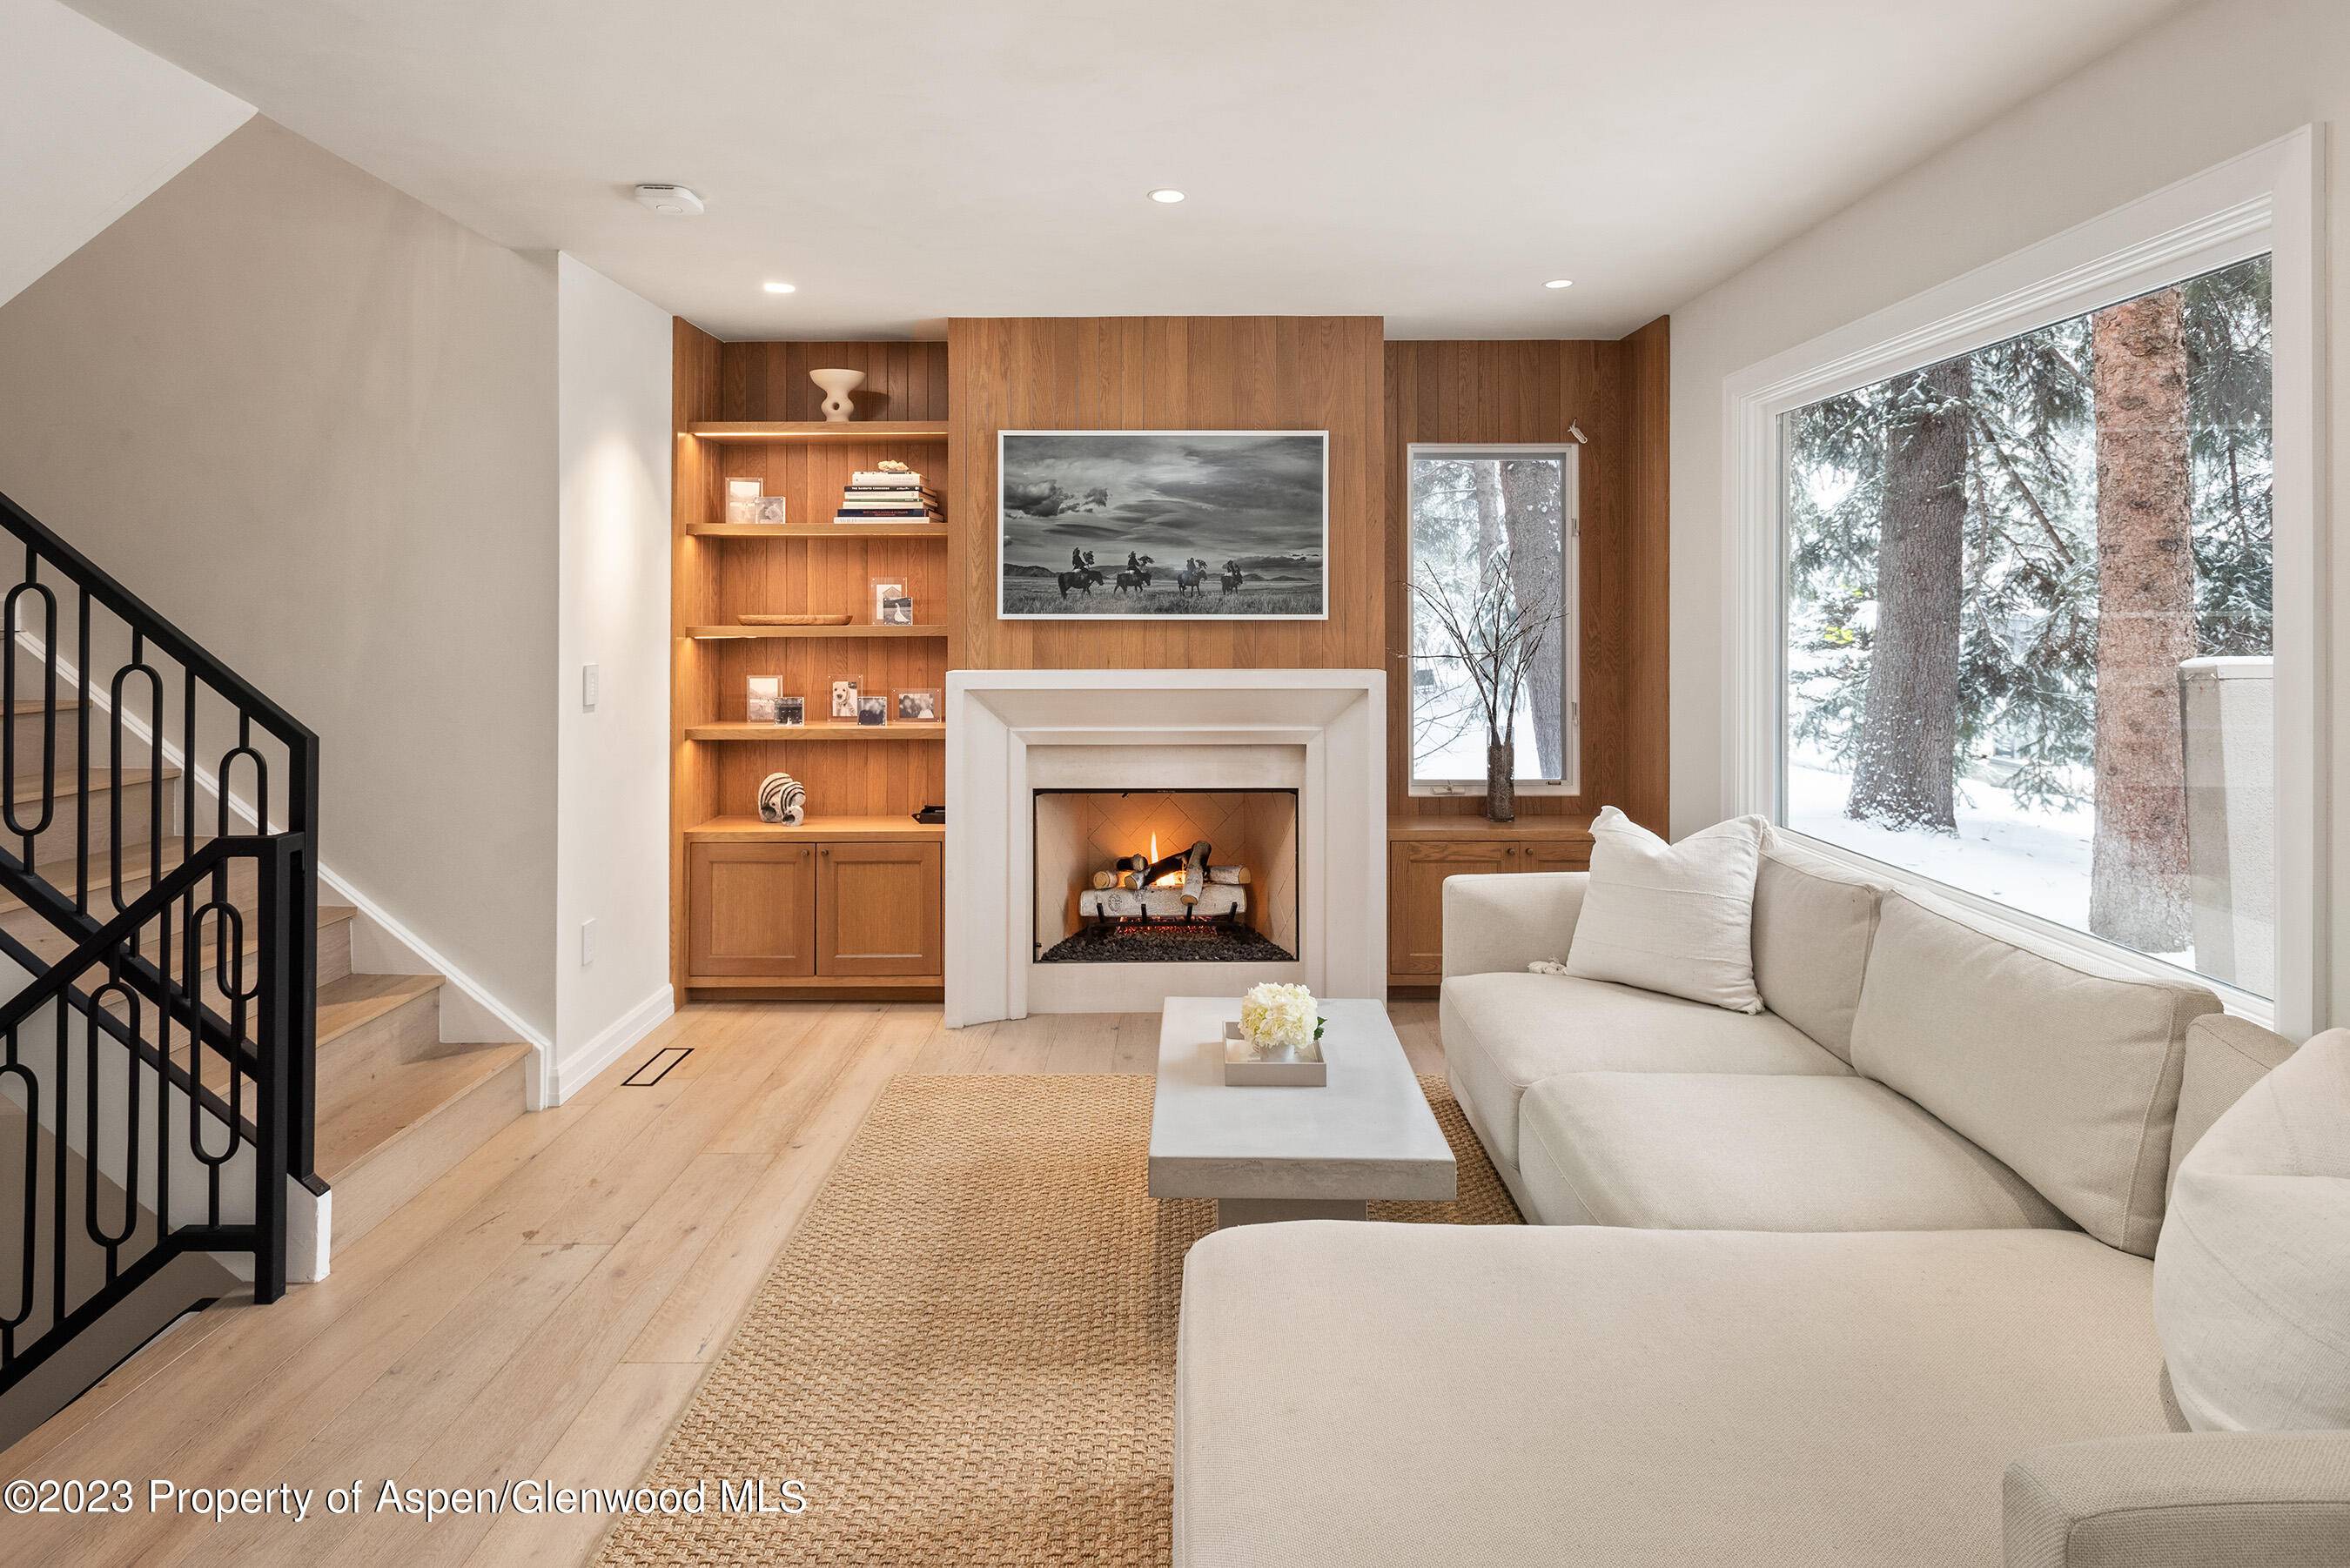 Completed in 2023, this Aspen townhome is a haven of warmth and thoughtful design, offering a unique experience for both ski and summer retreats.